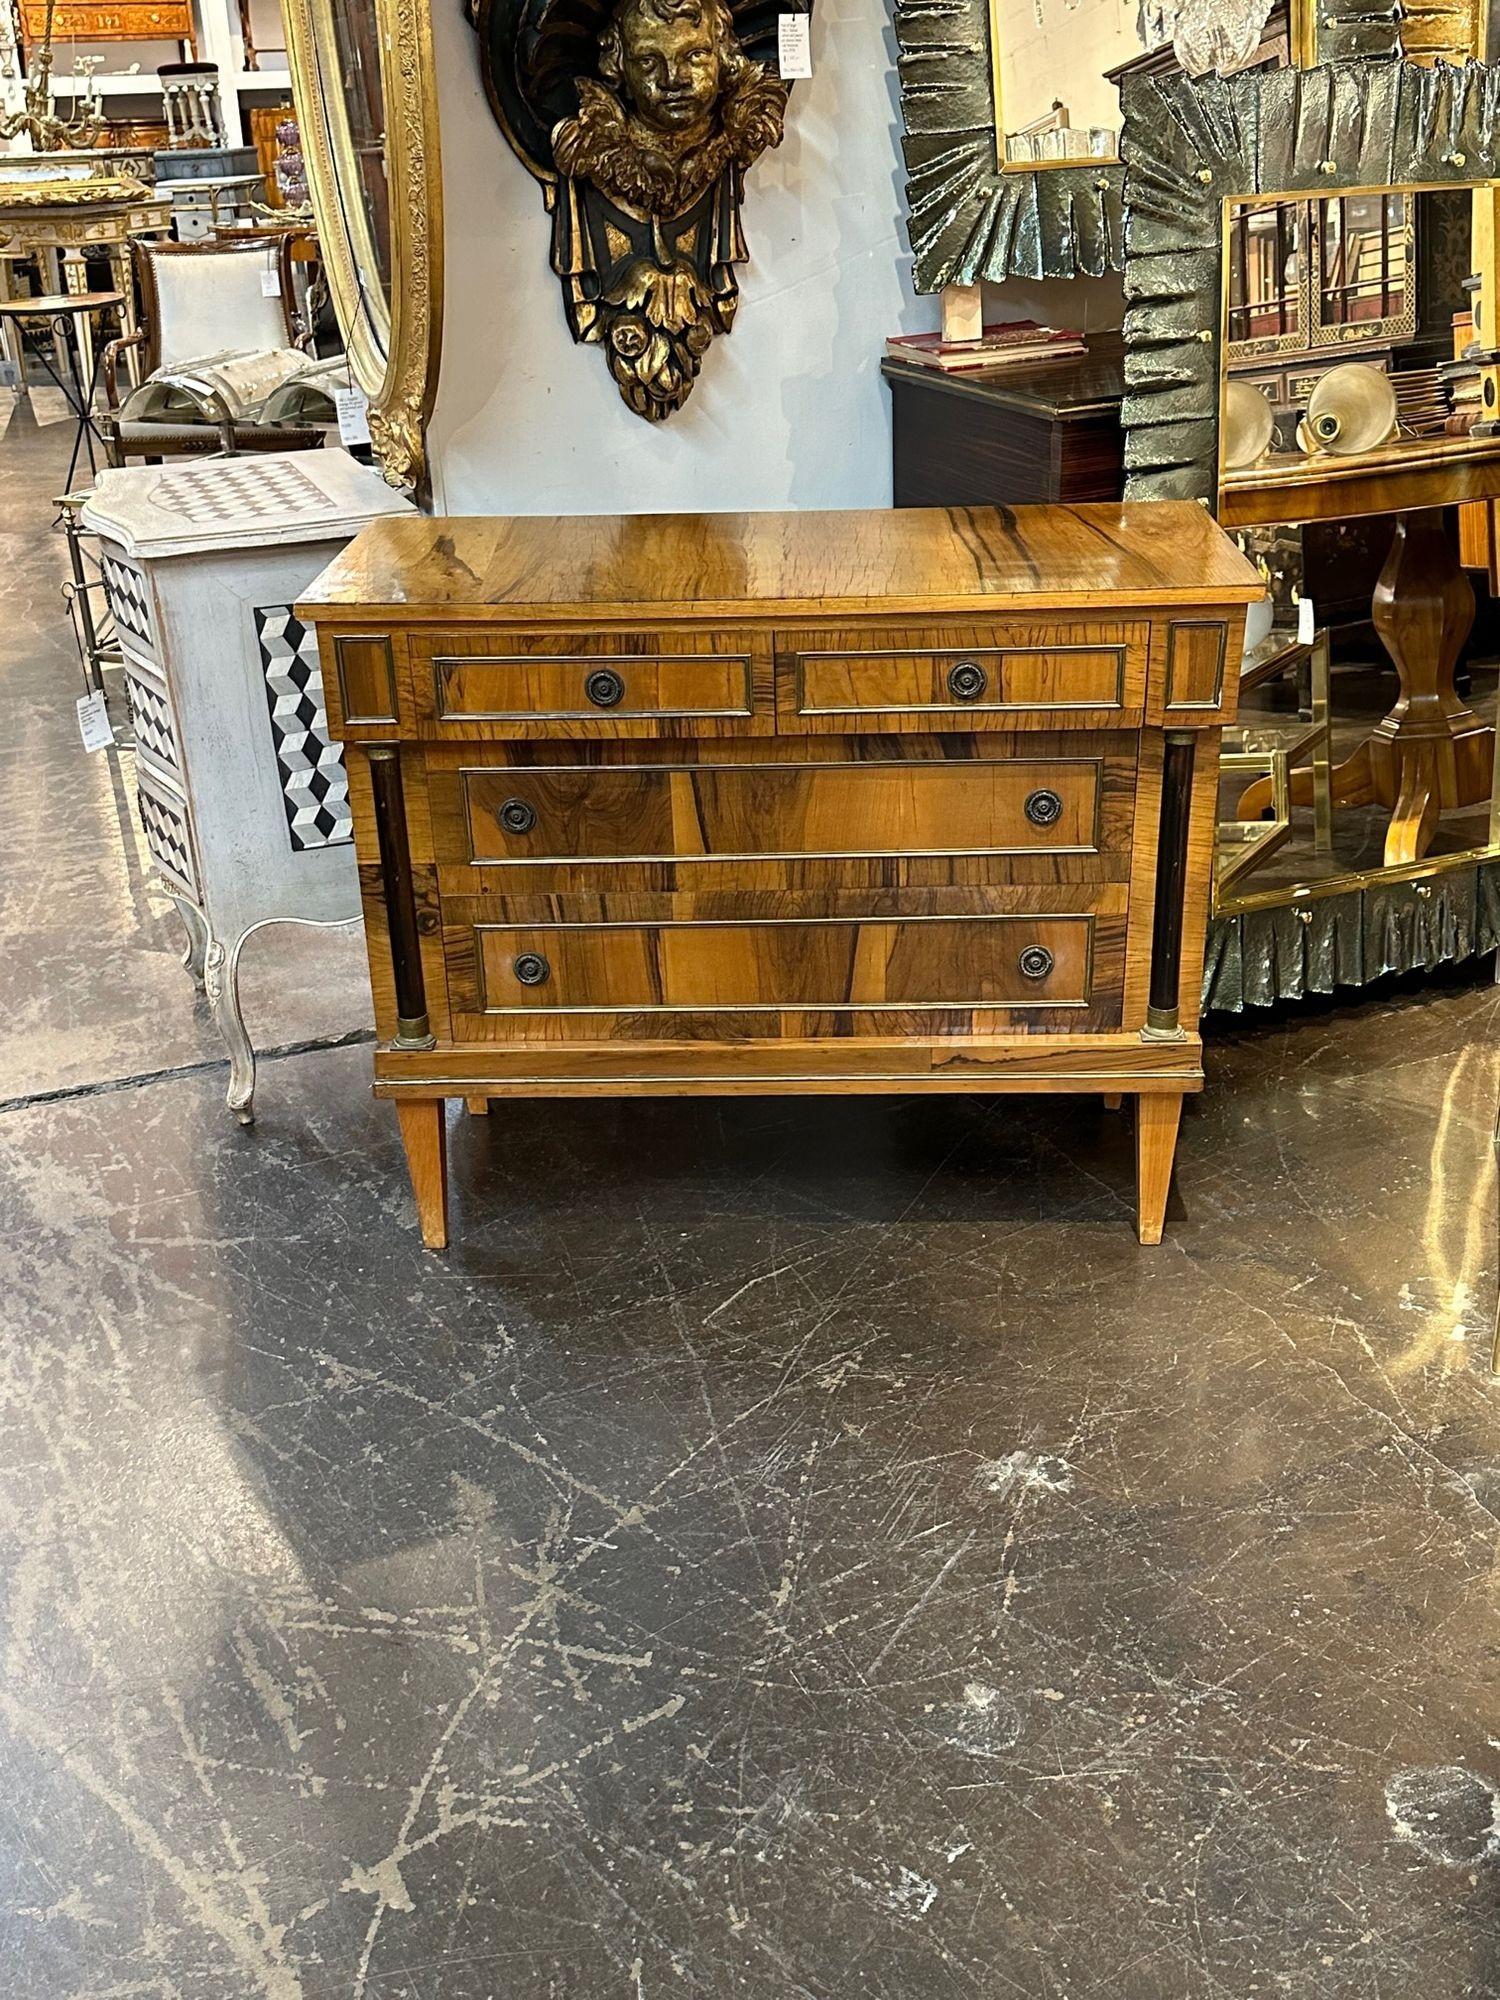 Handsome mid-century Italian Empire Style walnut chest. Featuring a gorgeous finish, lovely brass hardware and ebonized details. Makes an elegant statement!.